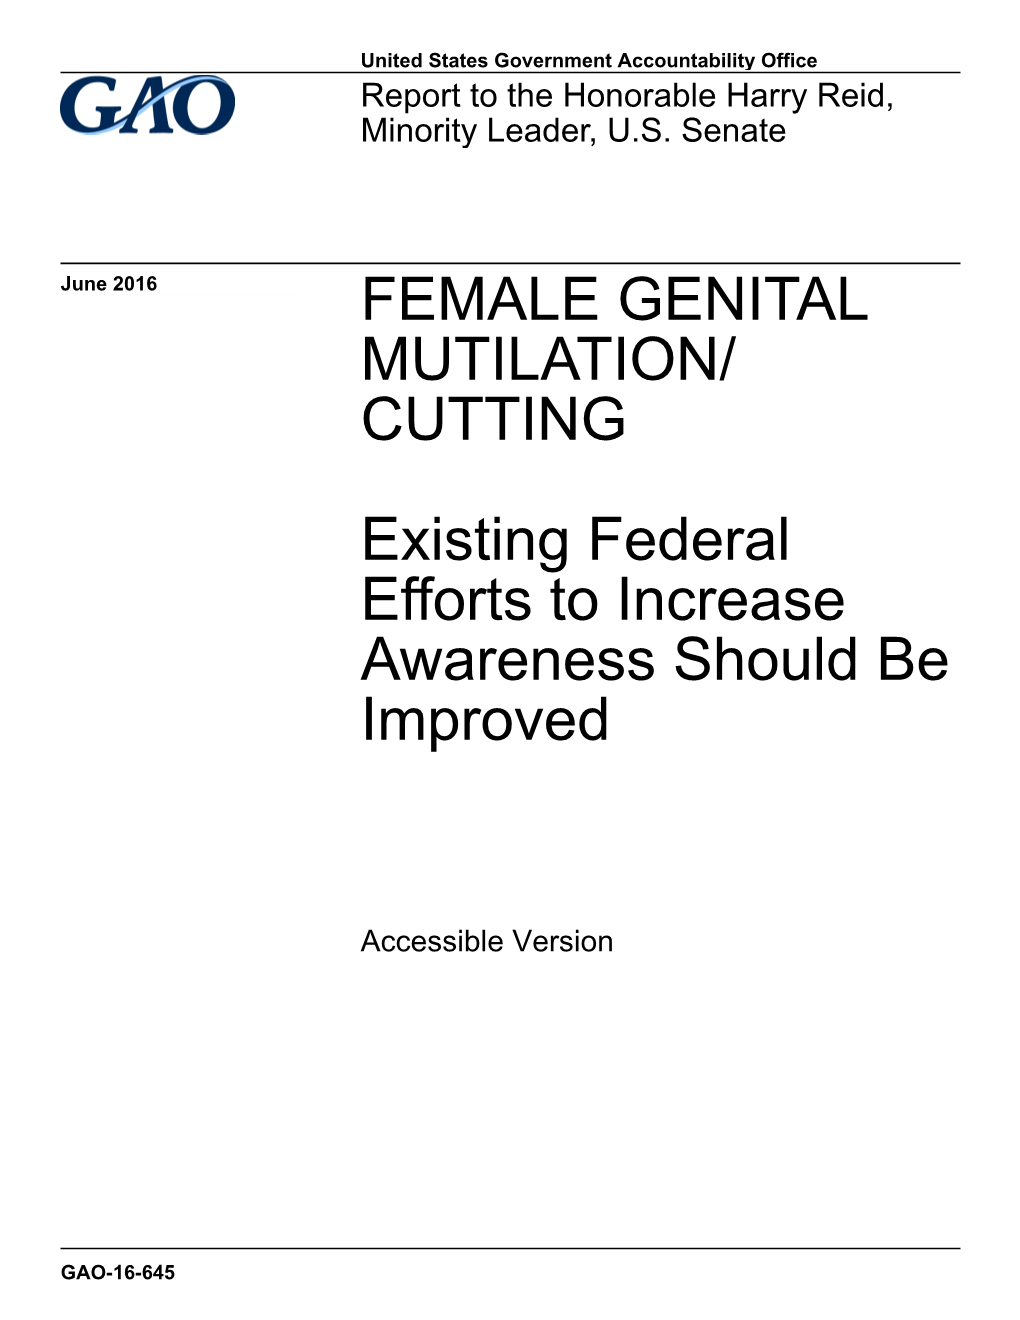 FEMALE GENITAL MUTILATION/ CUTTING Existing Federal Efforts to Increase Awareness Should Be Improved